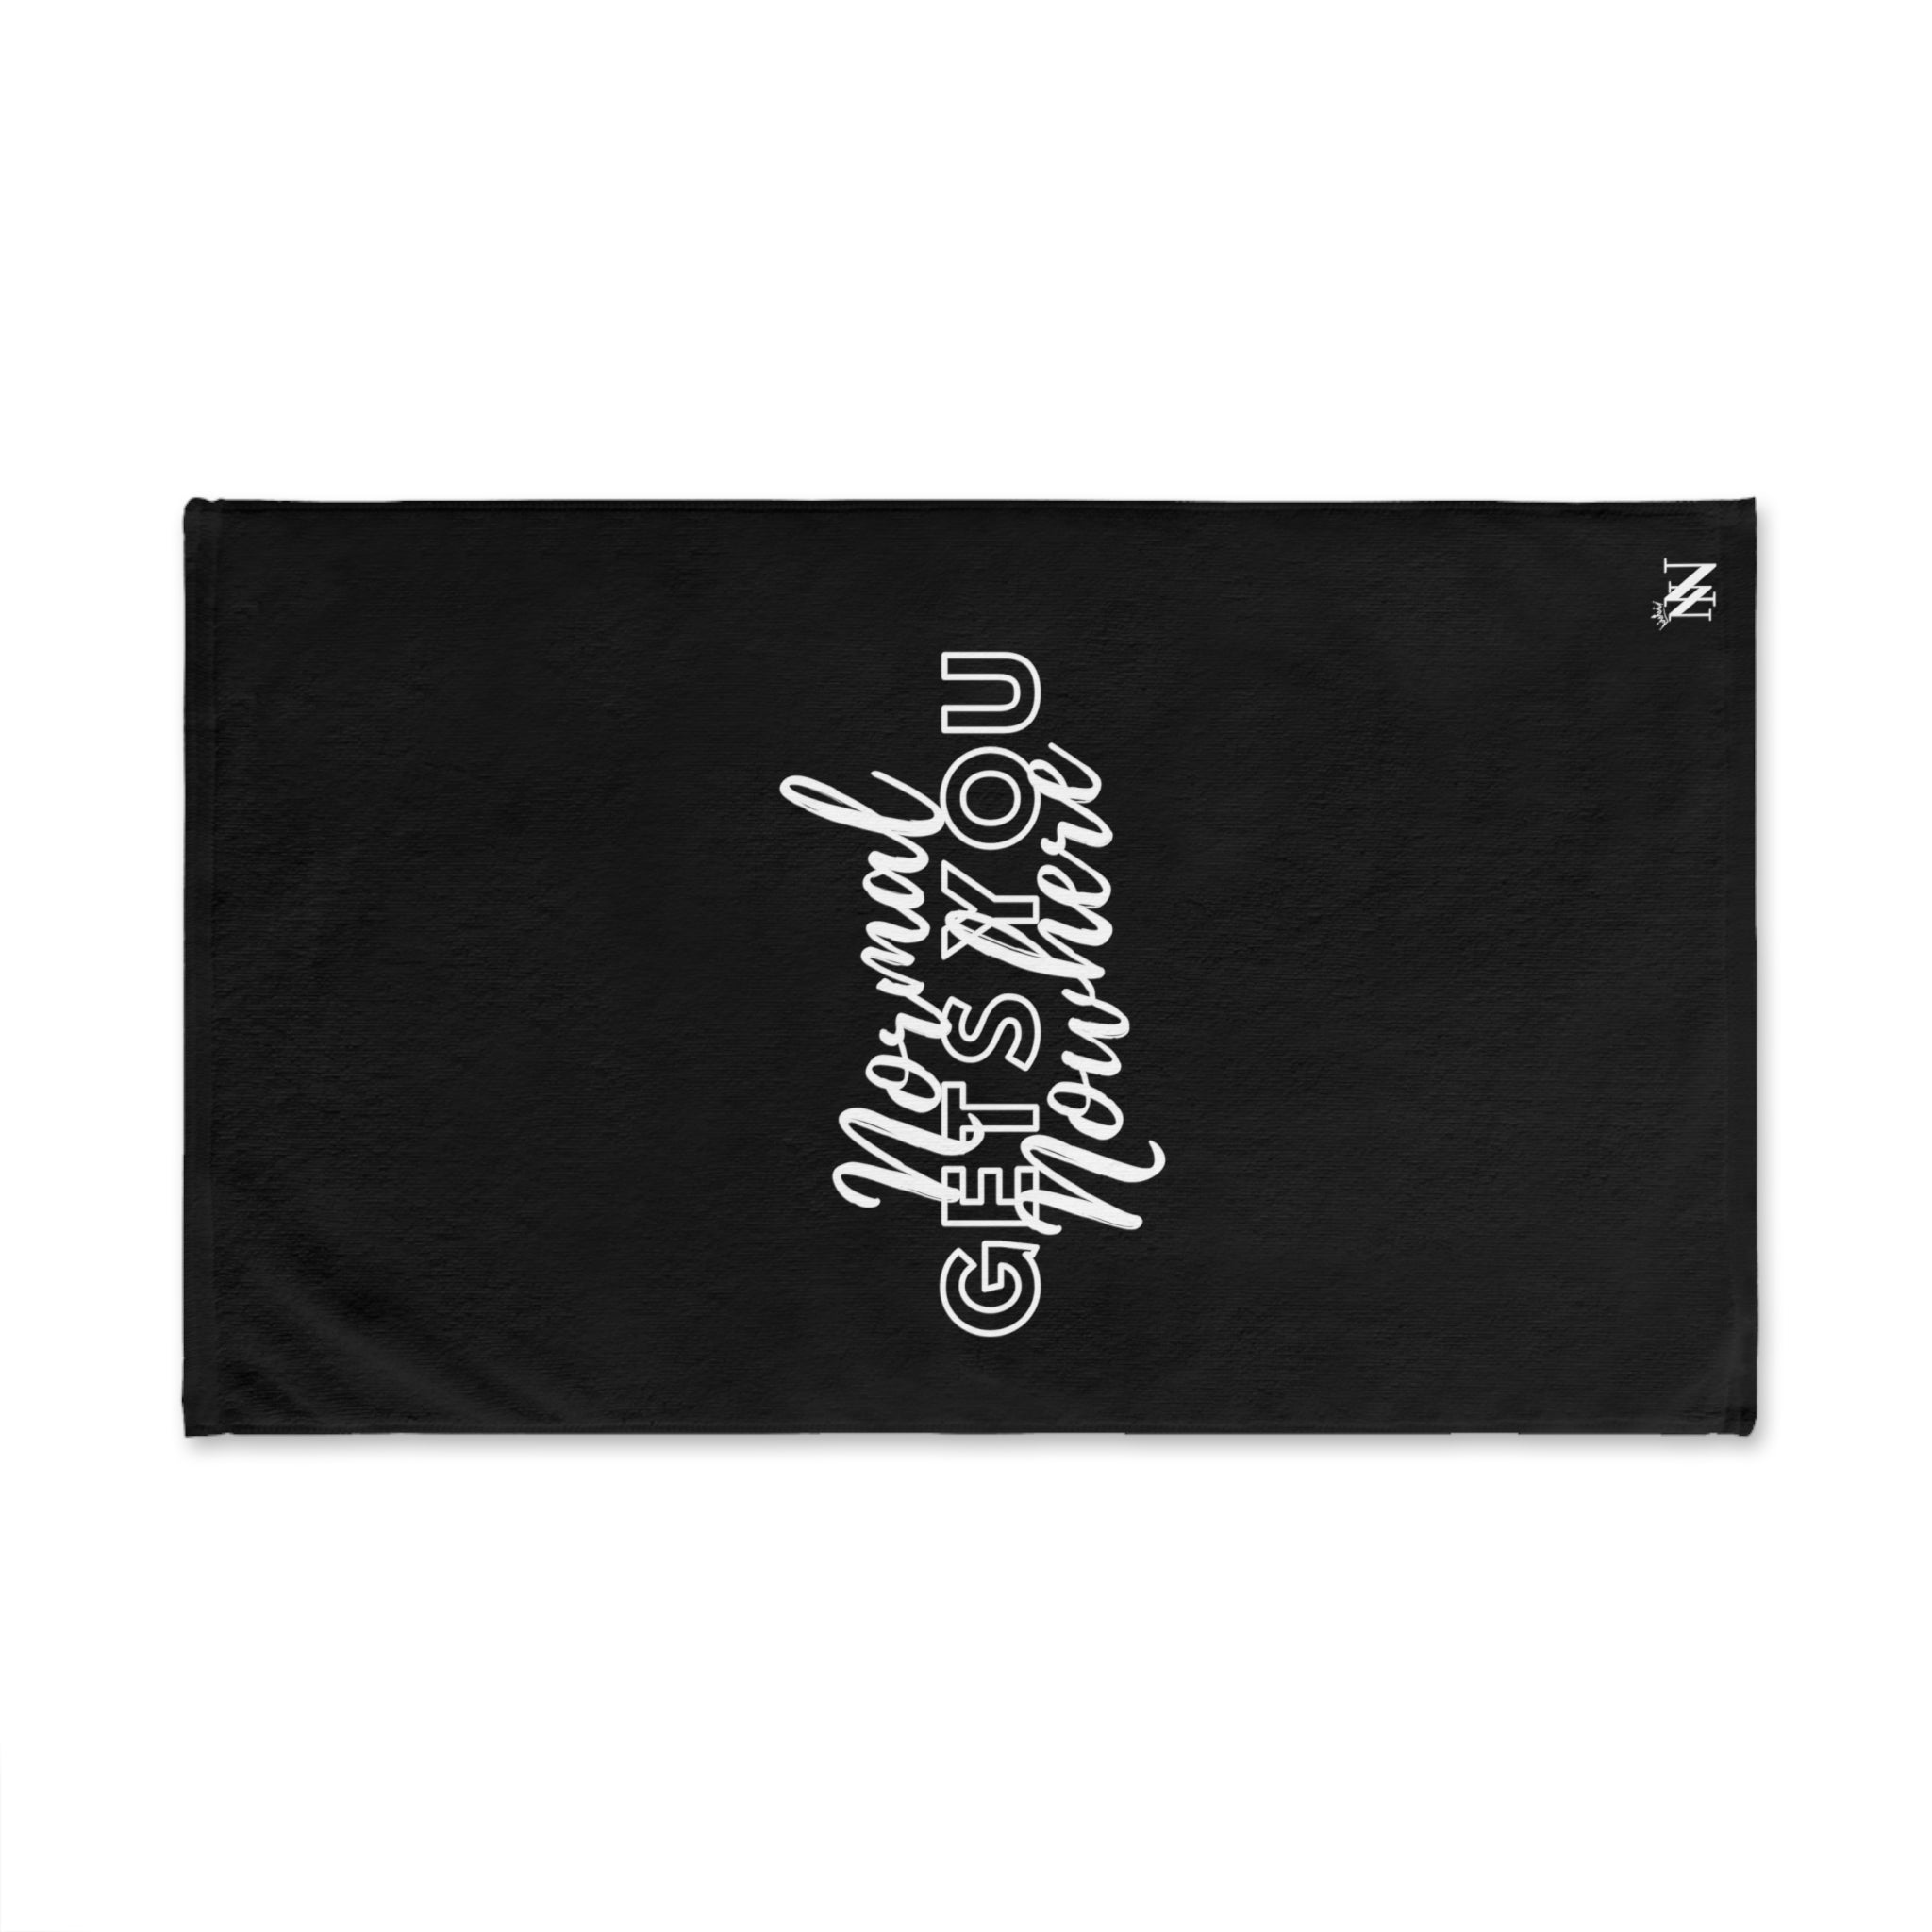 Normal Nowhere Black | Sexy Gifts for Boyfriend, Funny Towel Romantic Gift for Wedding Couple Fiance First Year 2nd Anniversary Valentines, Party Gag Gifts, Joke Humor Cloth for Husband Men BF NECTAR NAPKINS